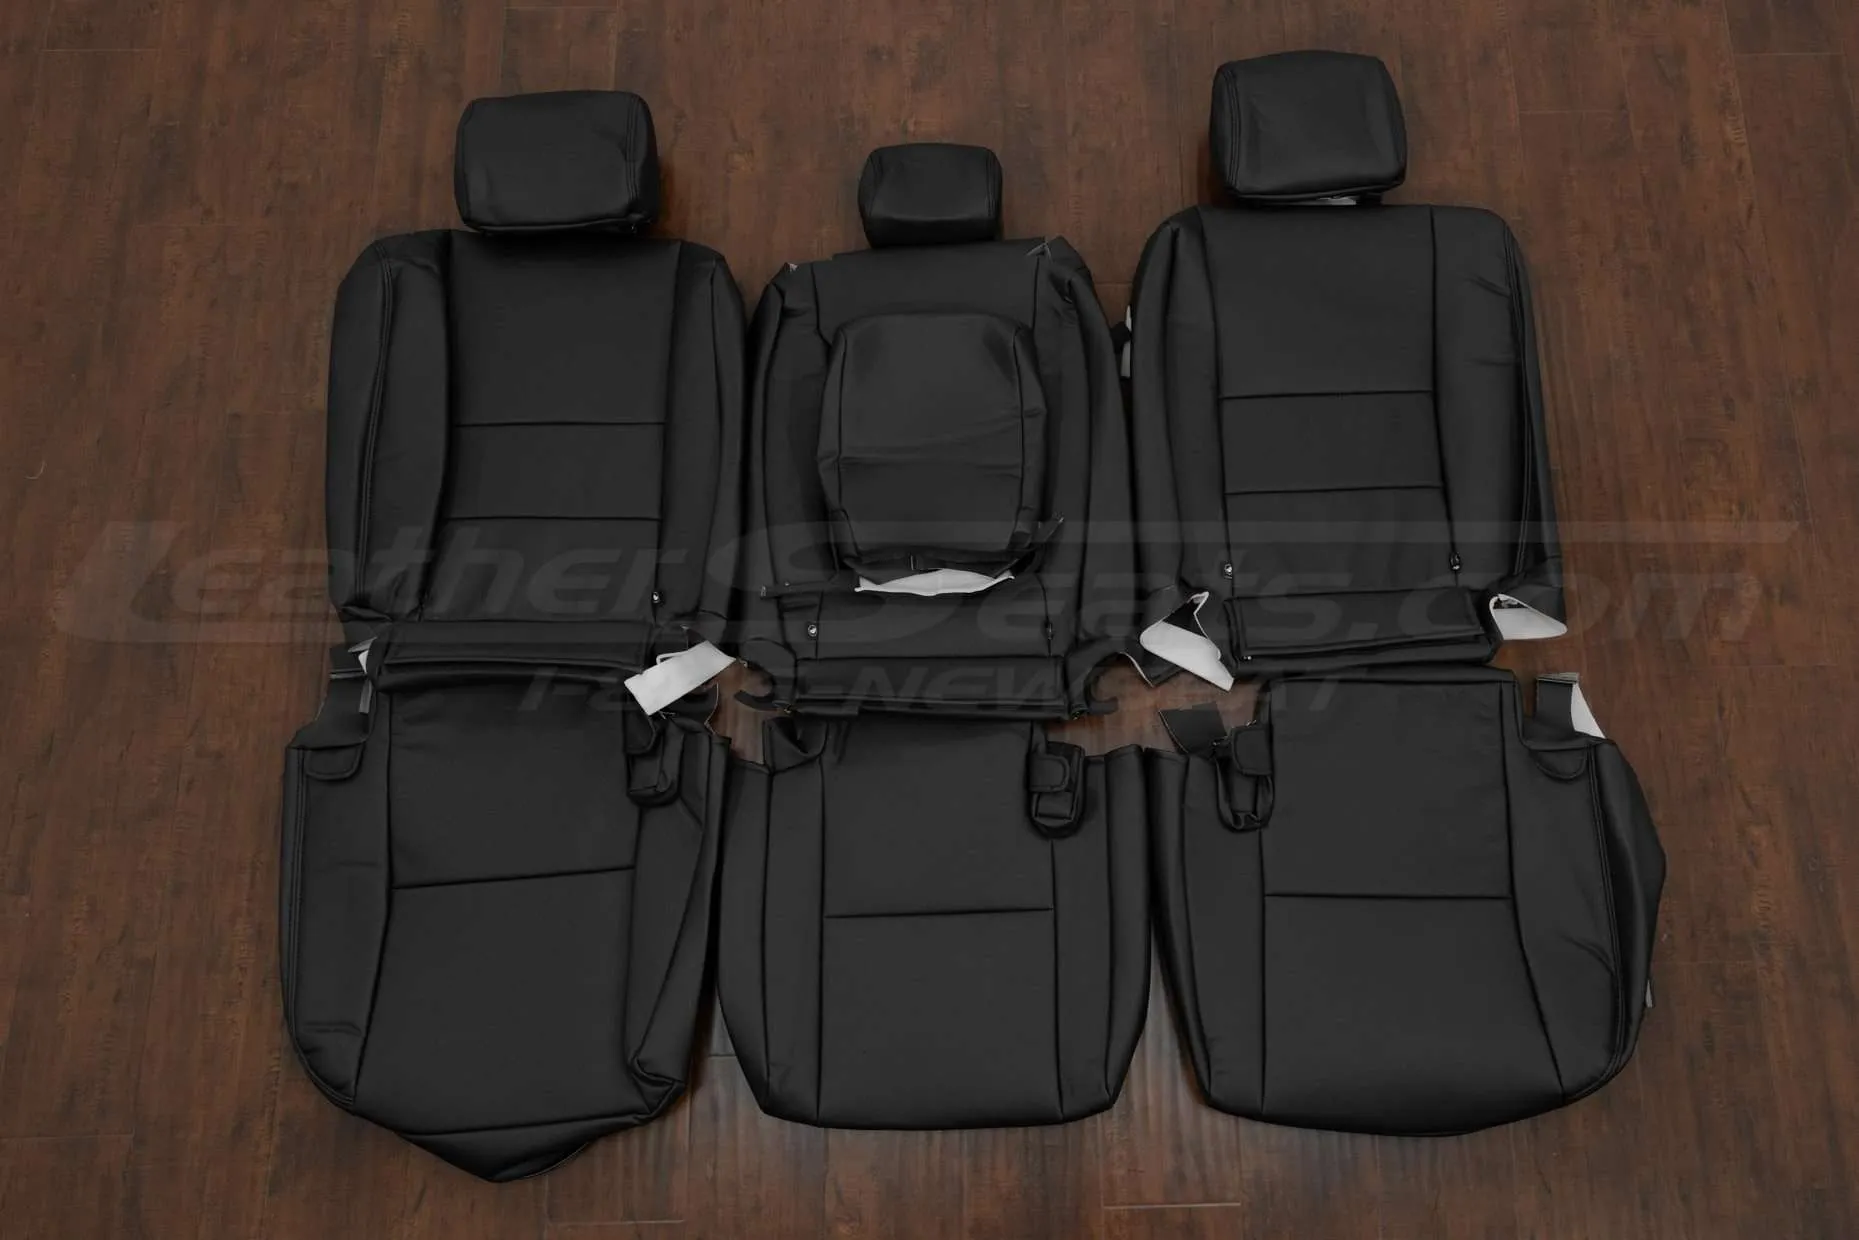 2012-2014 Toyota Sequoia Leather Seat Kit - Black - Middle row with armrest